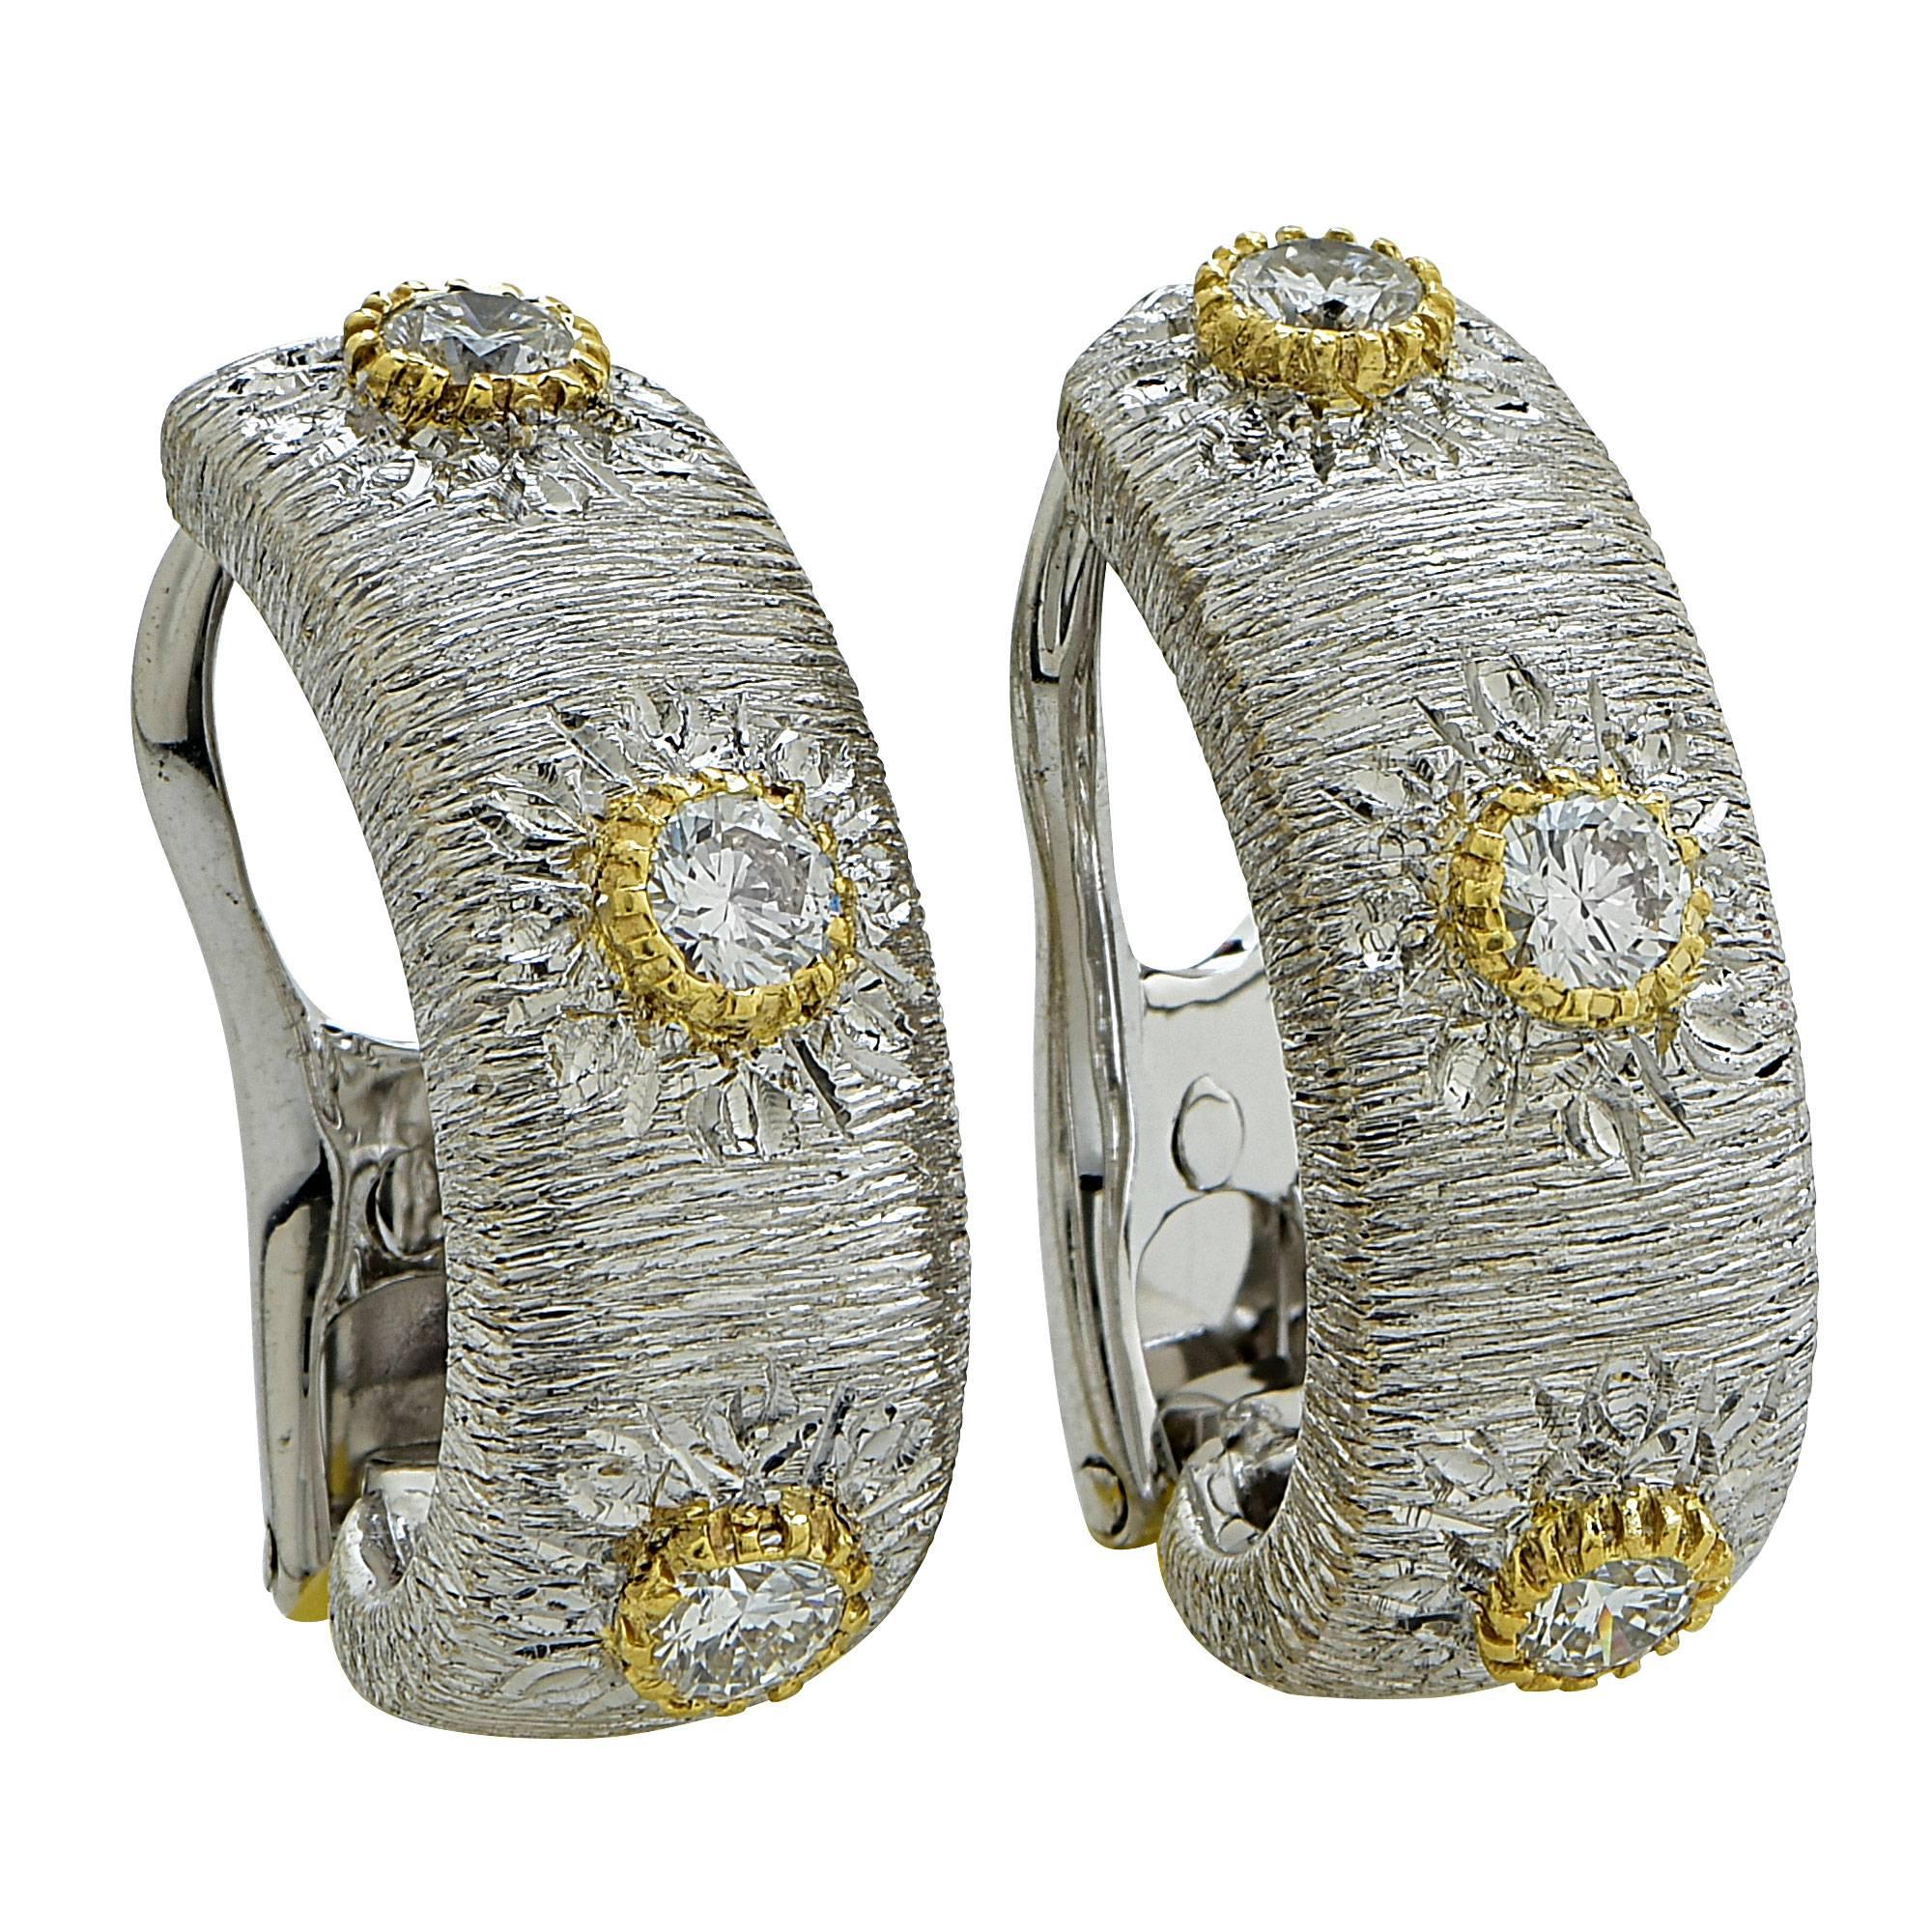 18k white and yellow gold hoop earrings featuring 6 round brilliant cut diamonds weighing approximately .60cts total, G color VS clarity. The earrings are clip-on and lever-back as the pin moves up and down depending on how you would like to wear